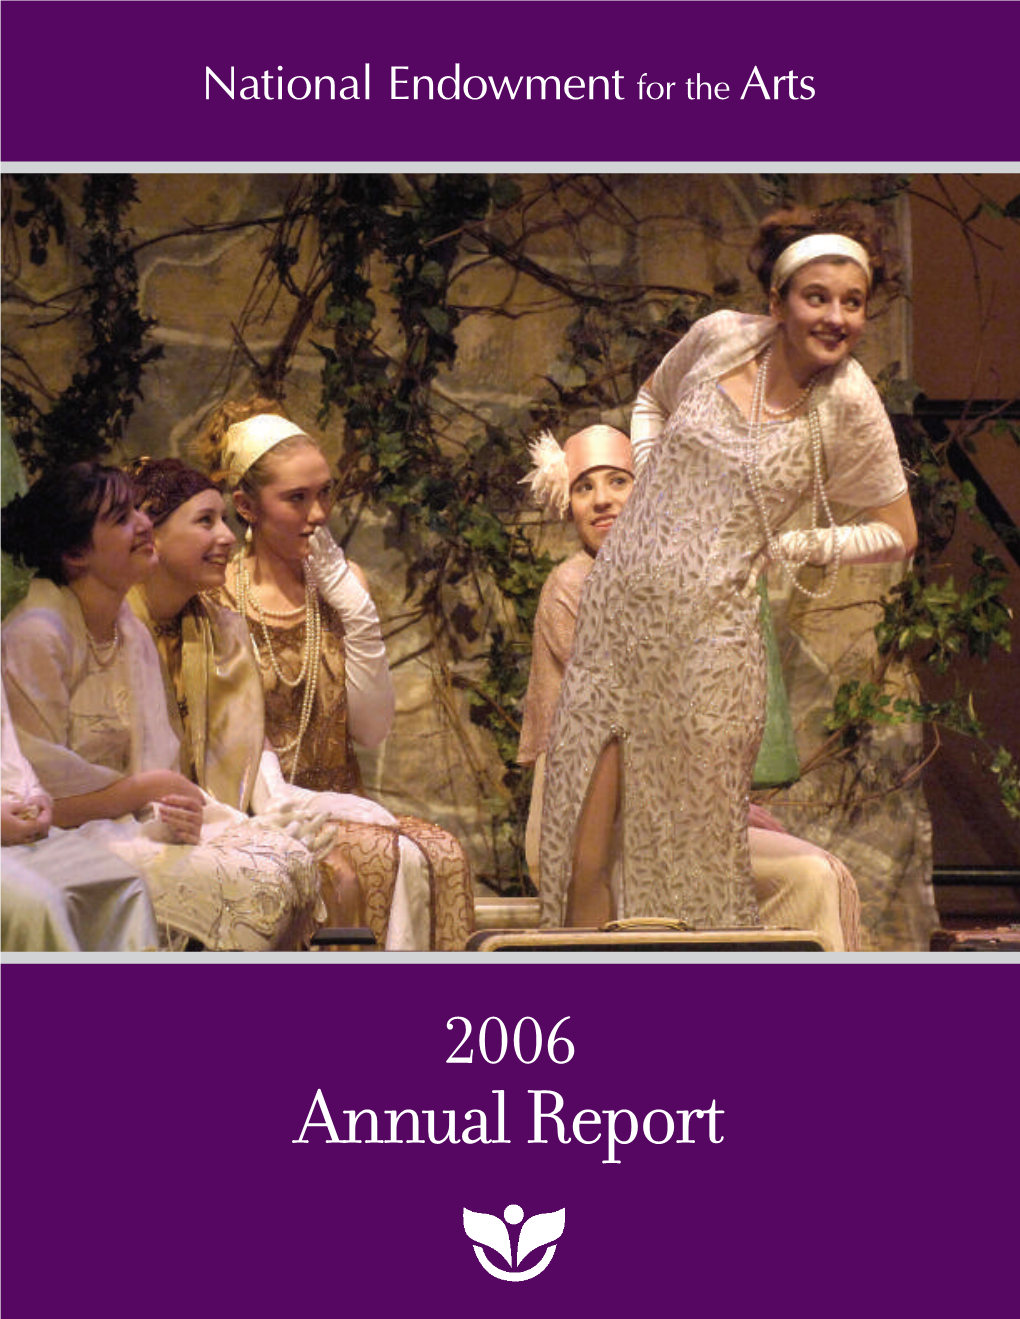 National Endowmennt for the Arts 2006 Annual Report